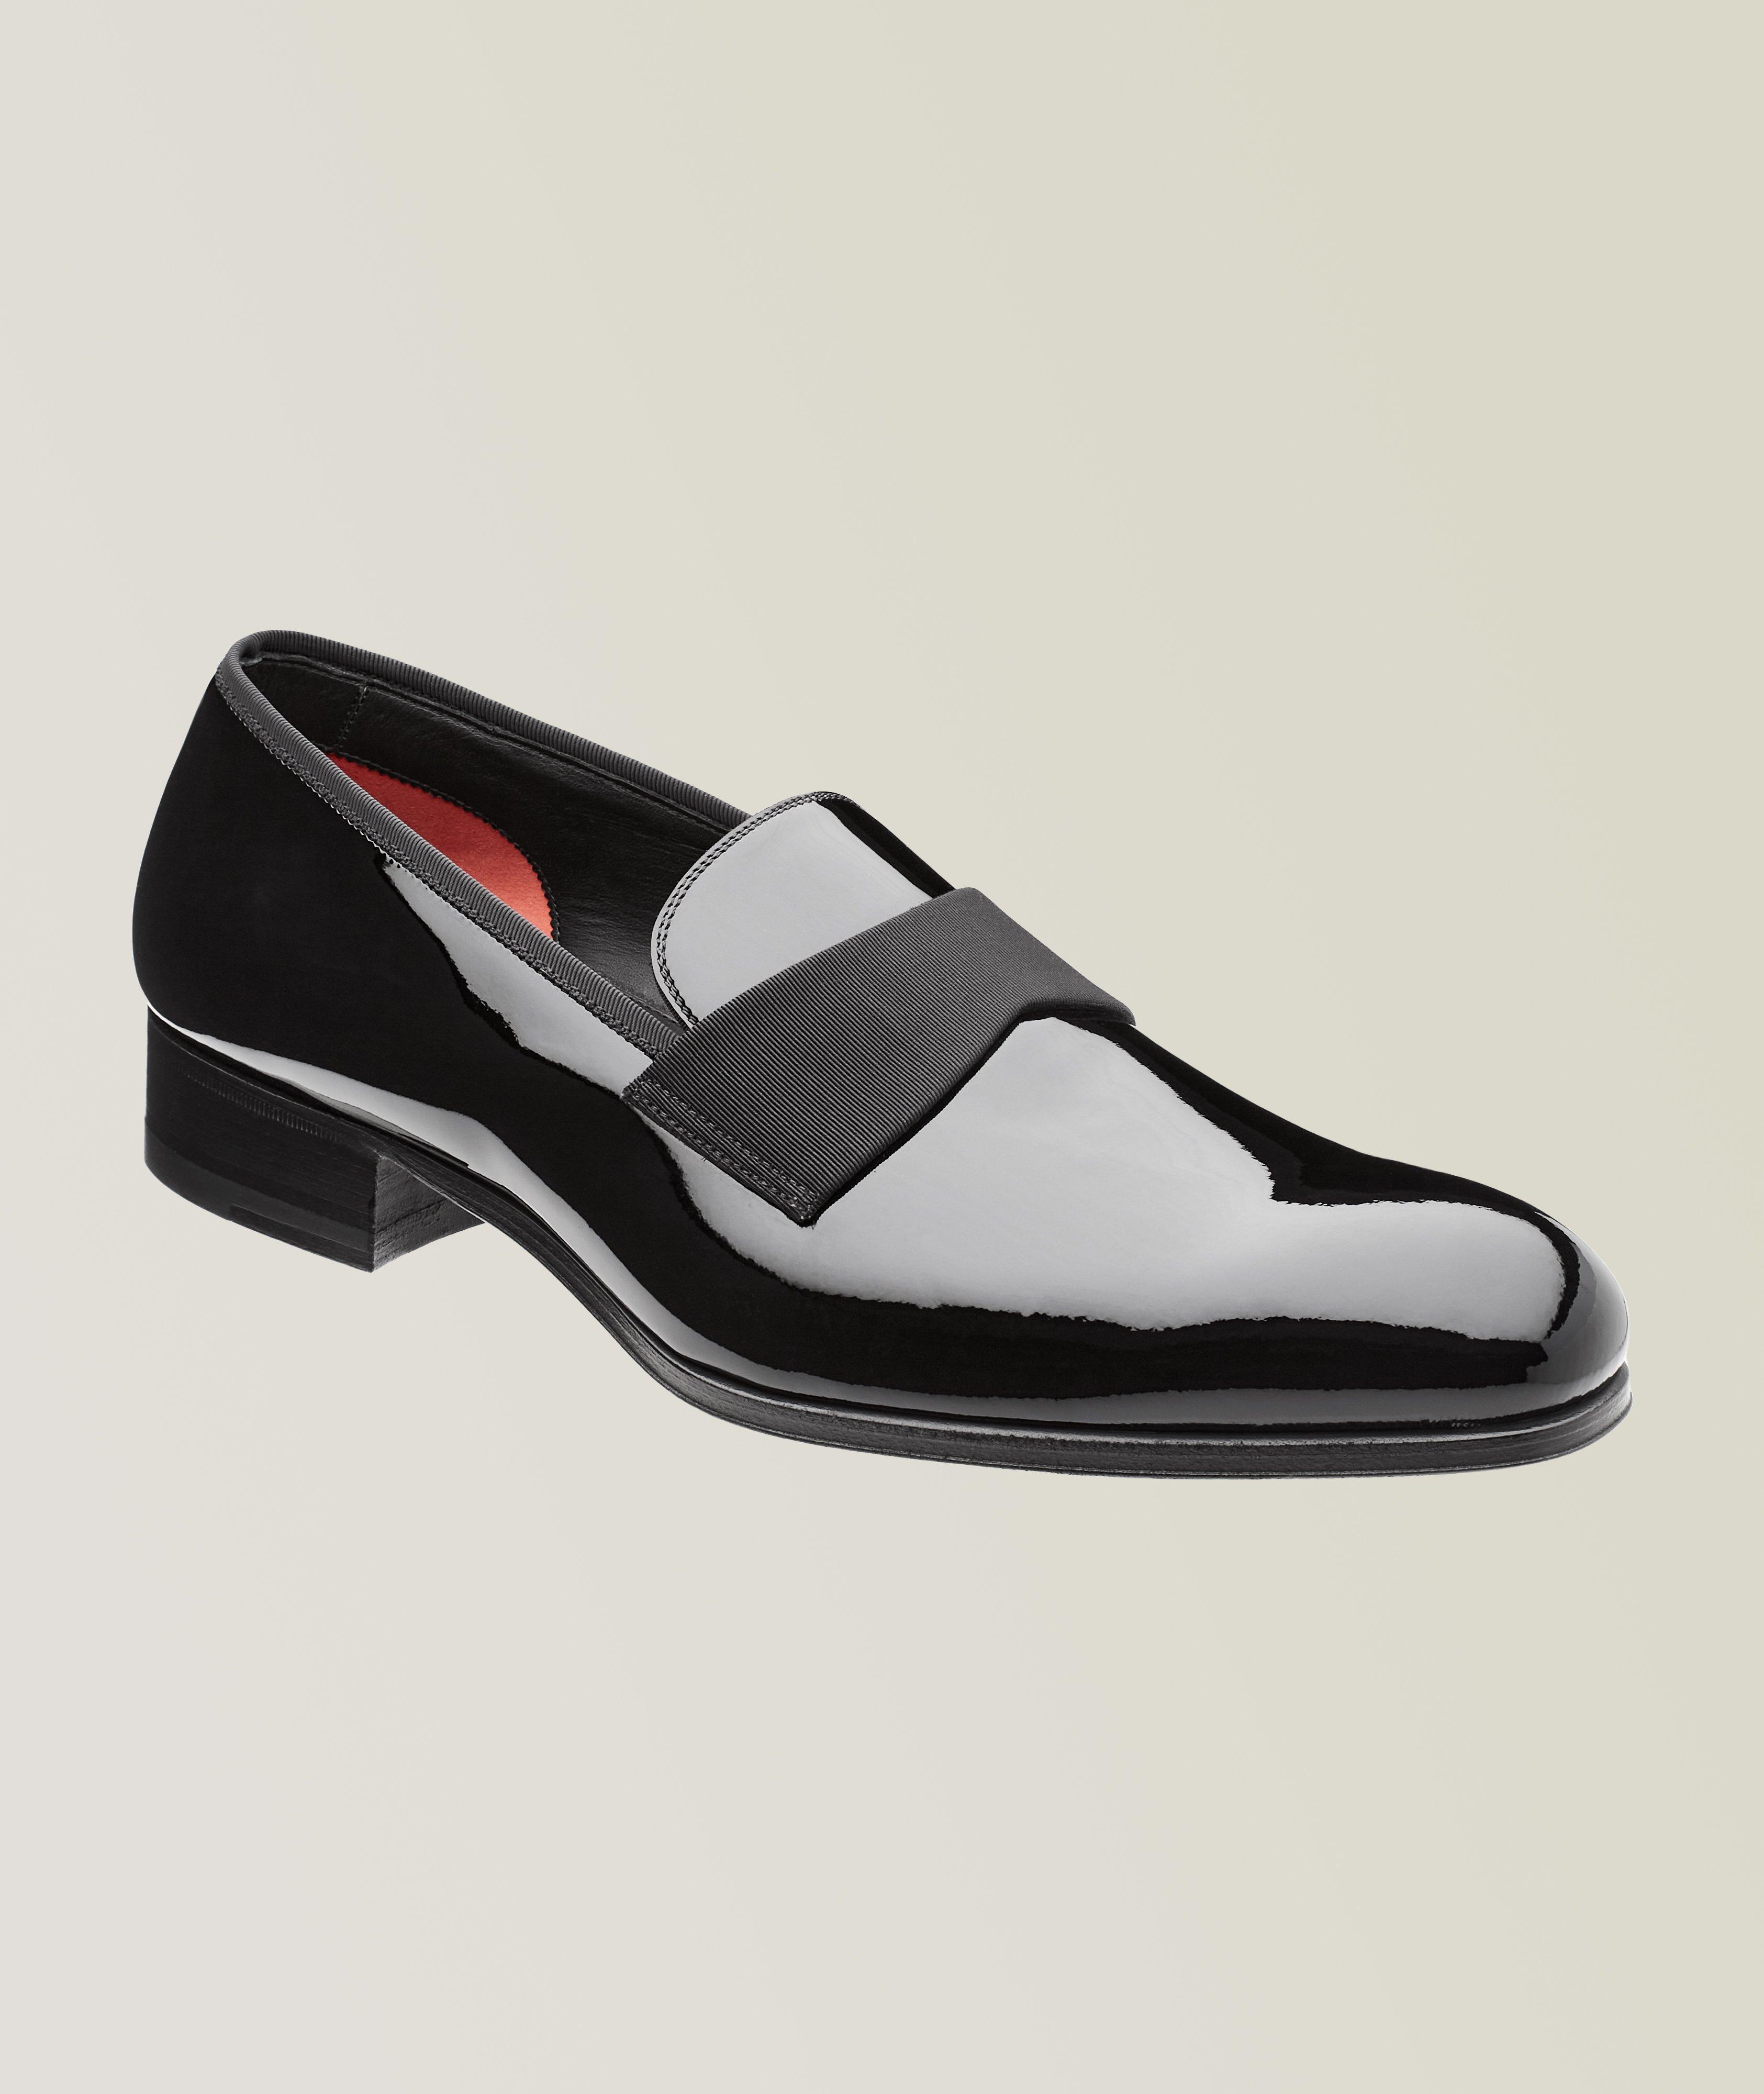 Tom Ford Patent Leather Edgar Loafers | Dress Shoes | Harry Rosen